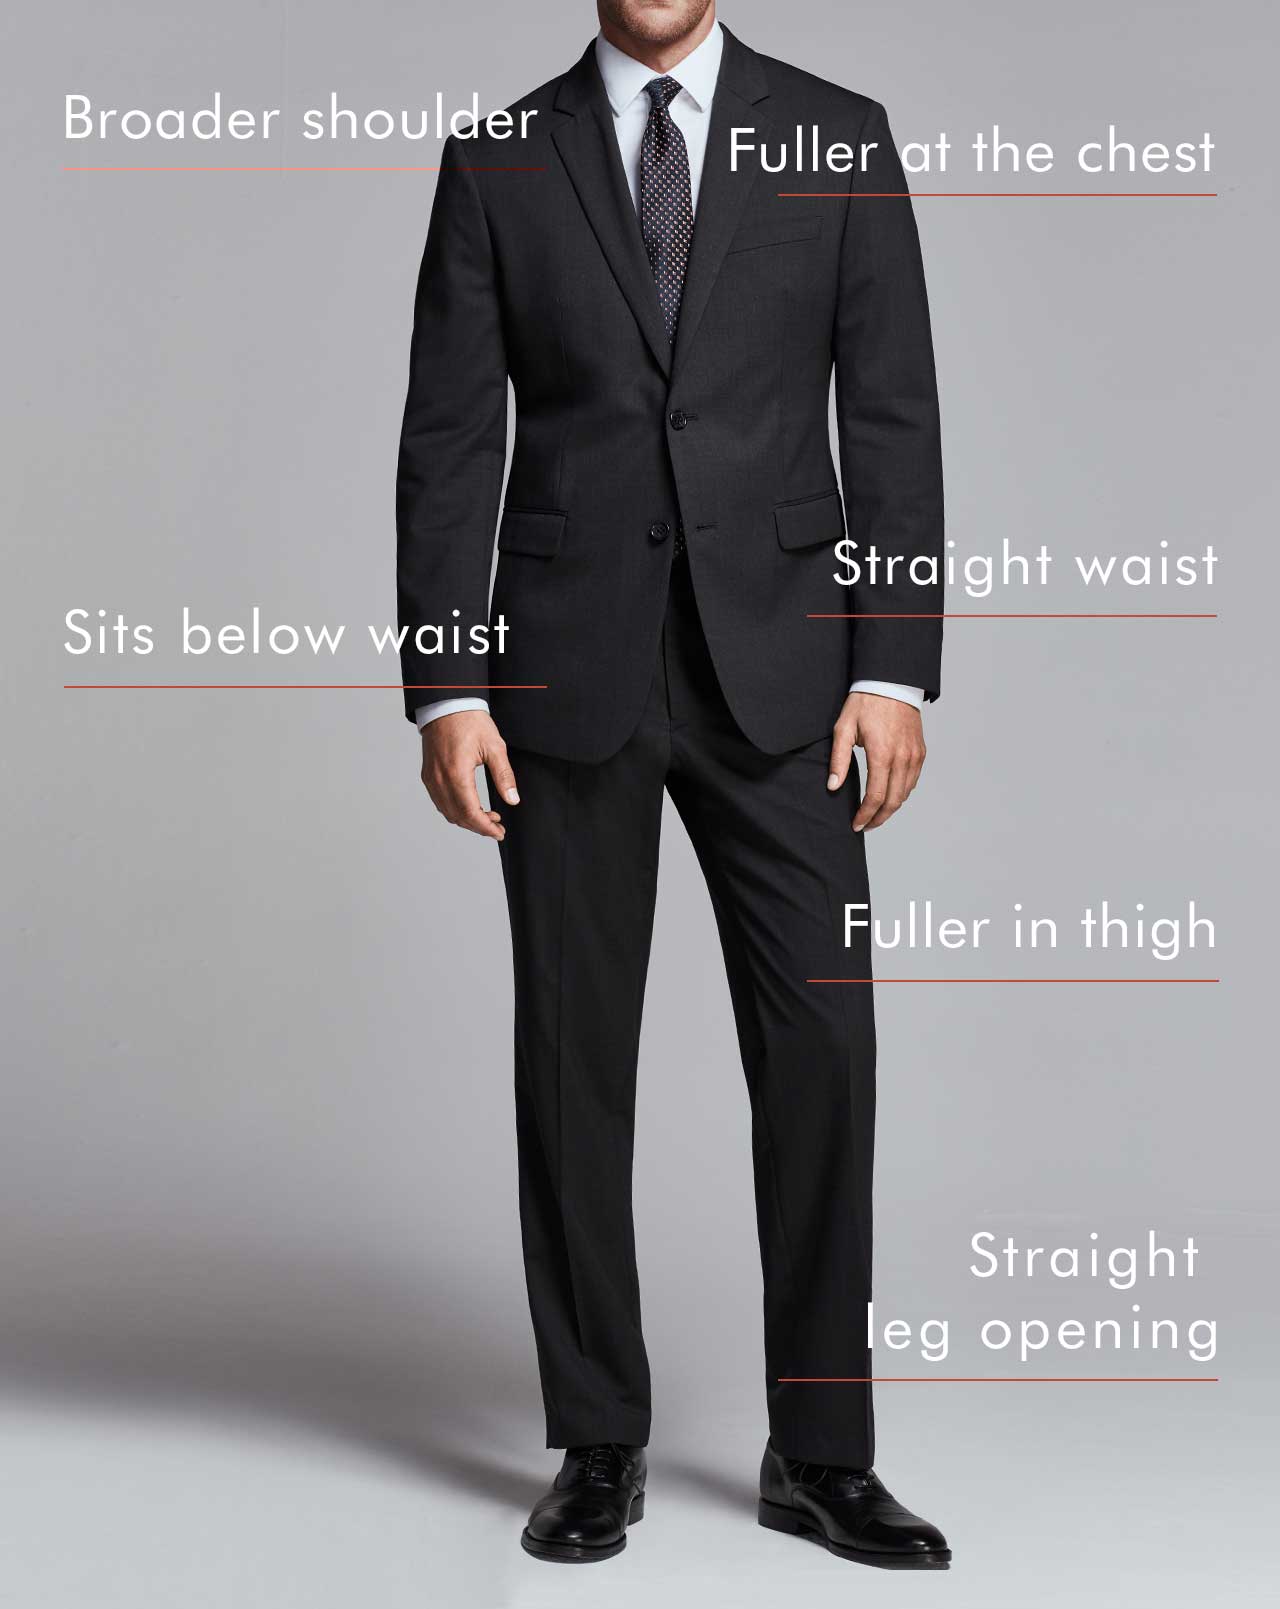 Slim Fit Suits, Size Guide